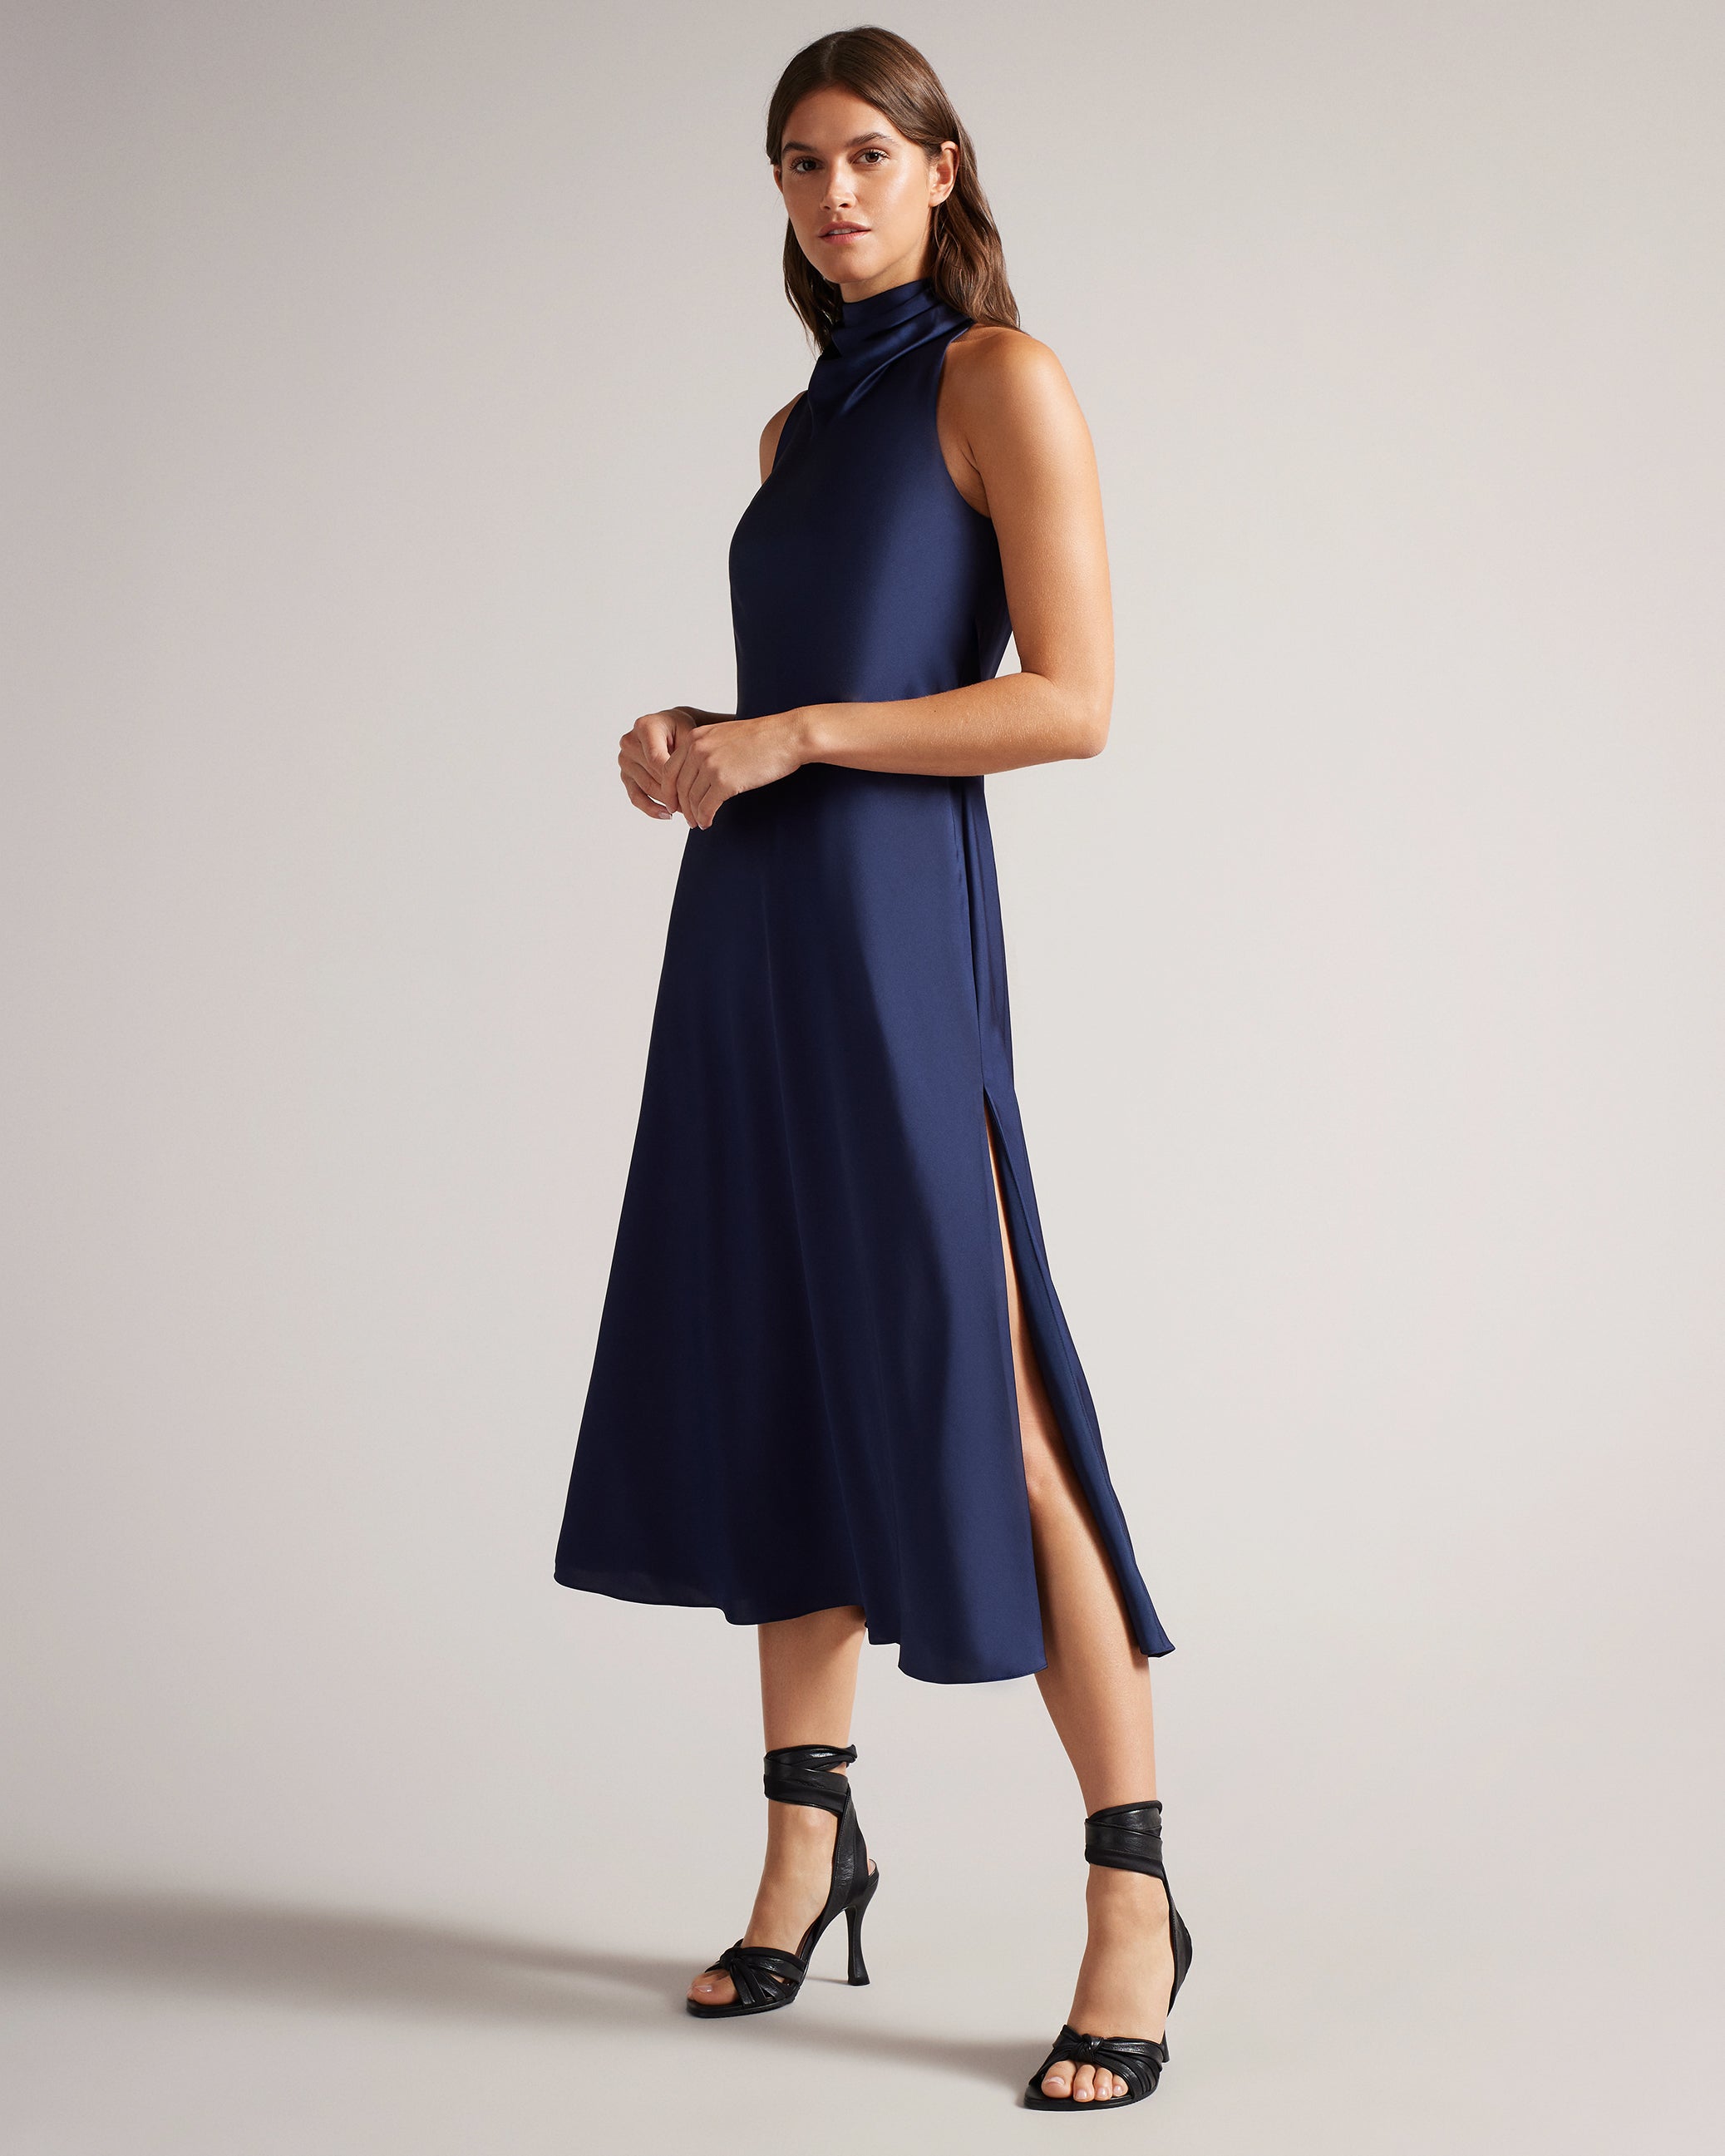 Ted Baker mixed geo lace midi dress in navy